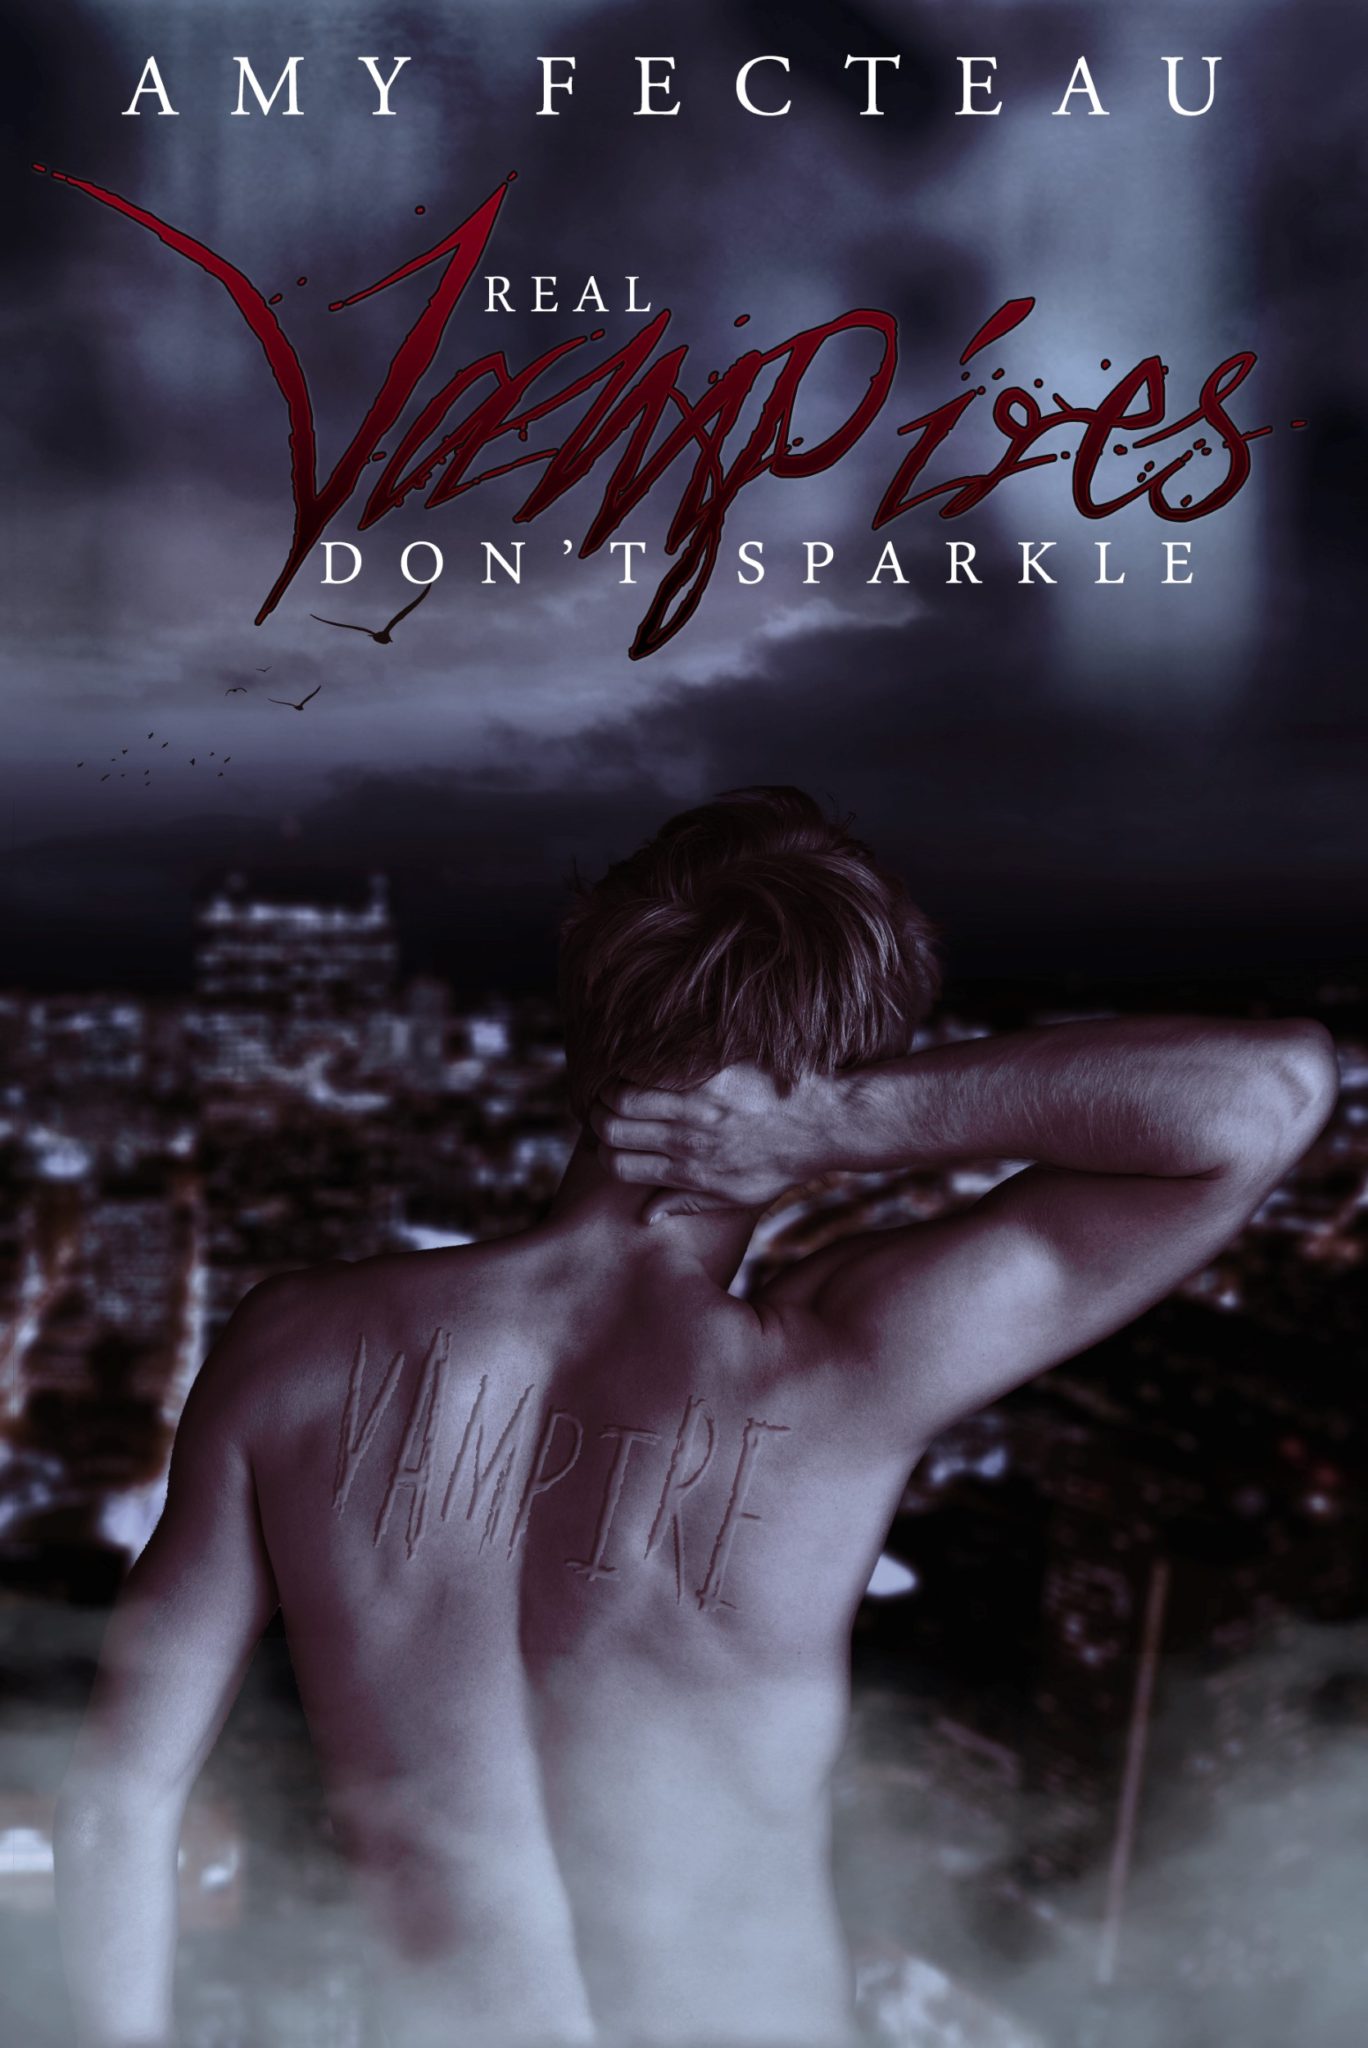 FREE: Real Vampires Don’t Sparkle by Amy Fecteau